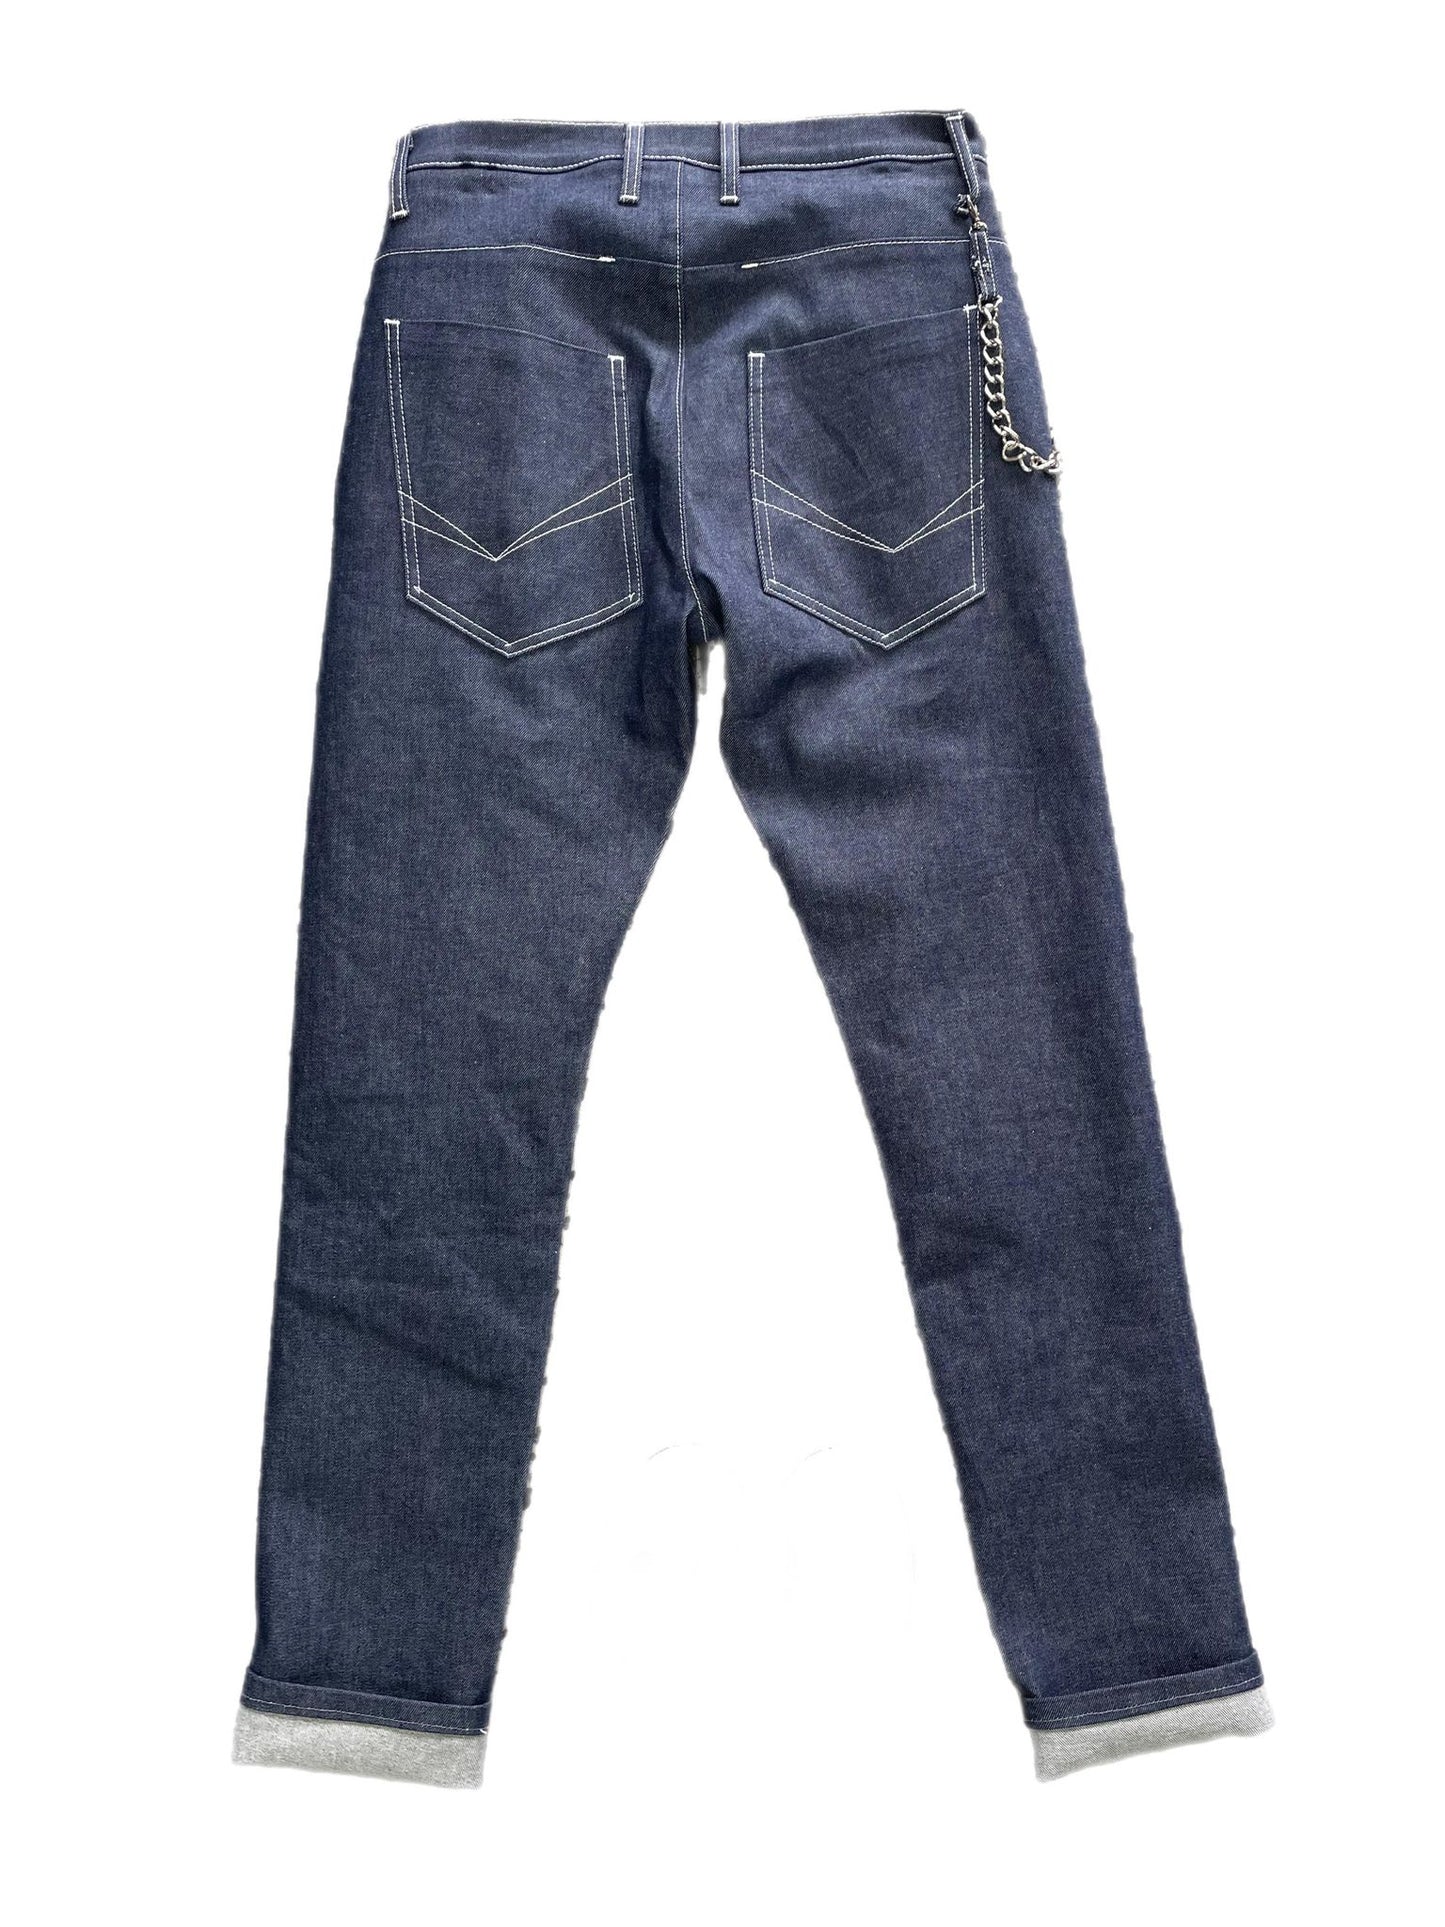 TKD Limited Edition Jordy Raw Slim Riding Jeans Combo